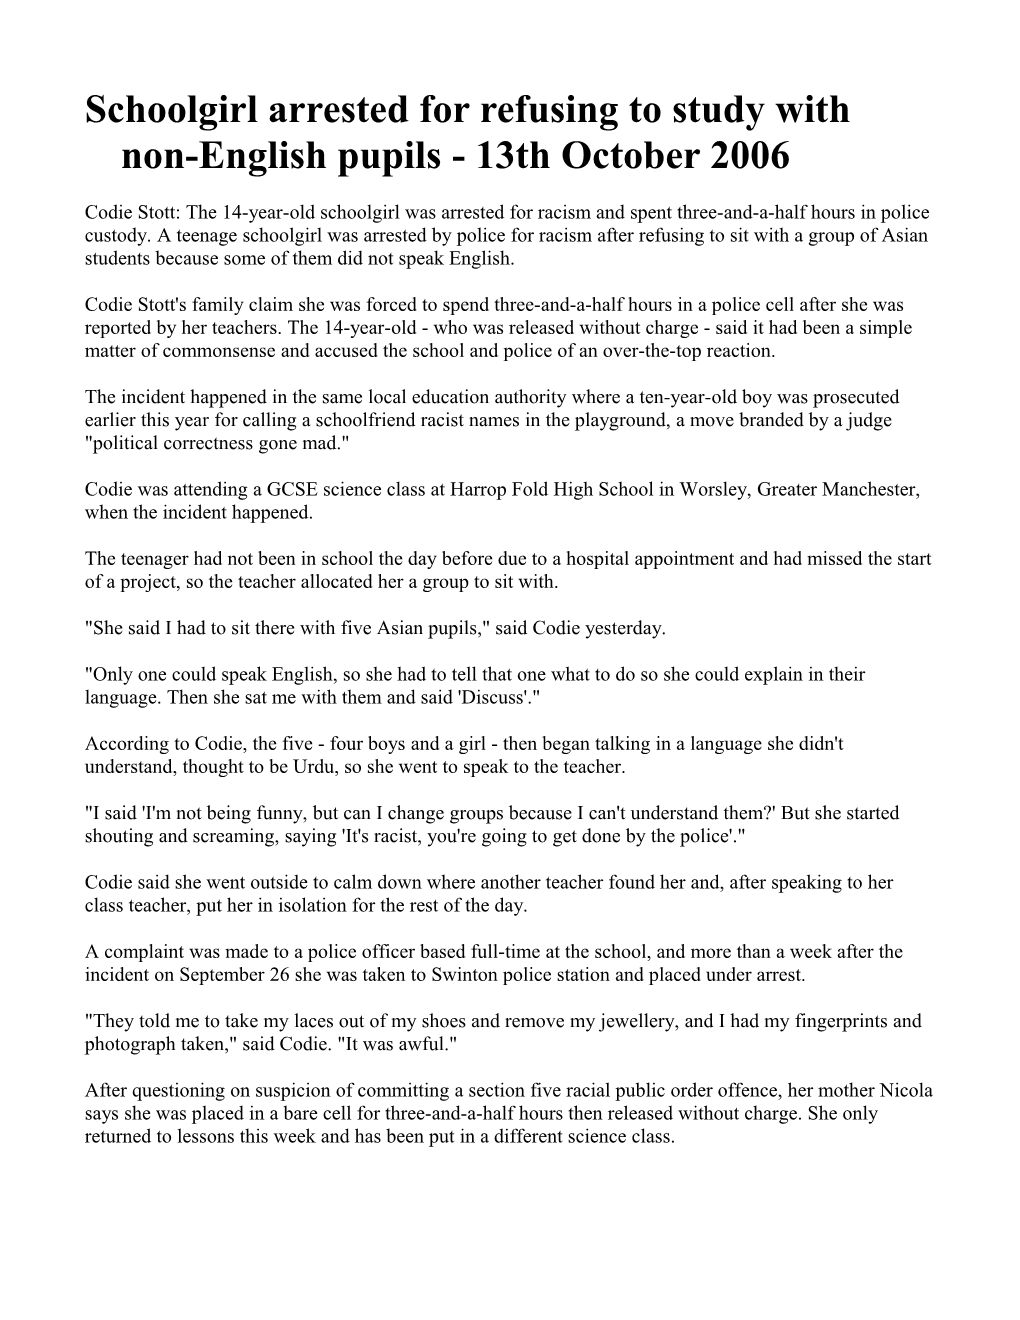 Schoolgirl Arrested for Refusing to Study with Non-English Pupils - 13Th October 2006